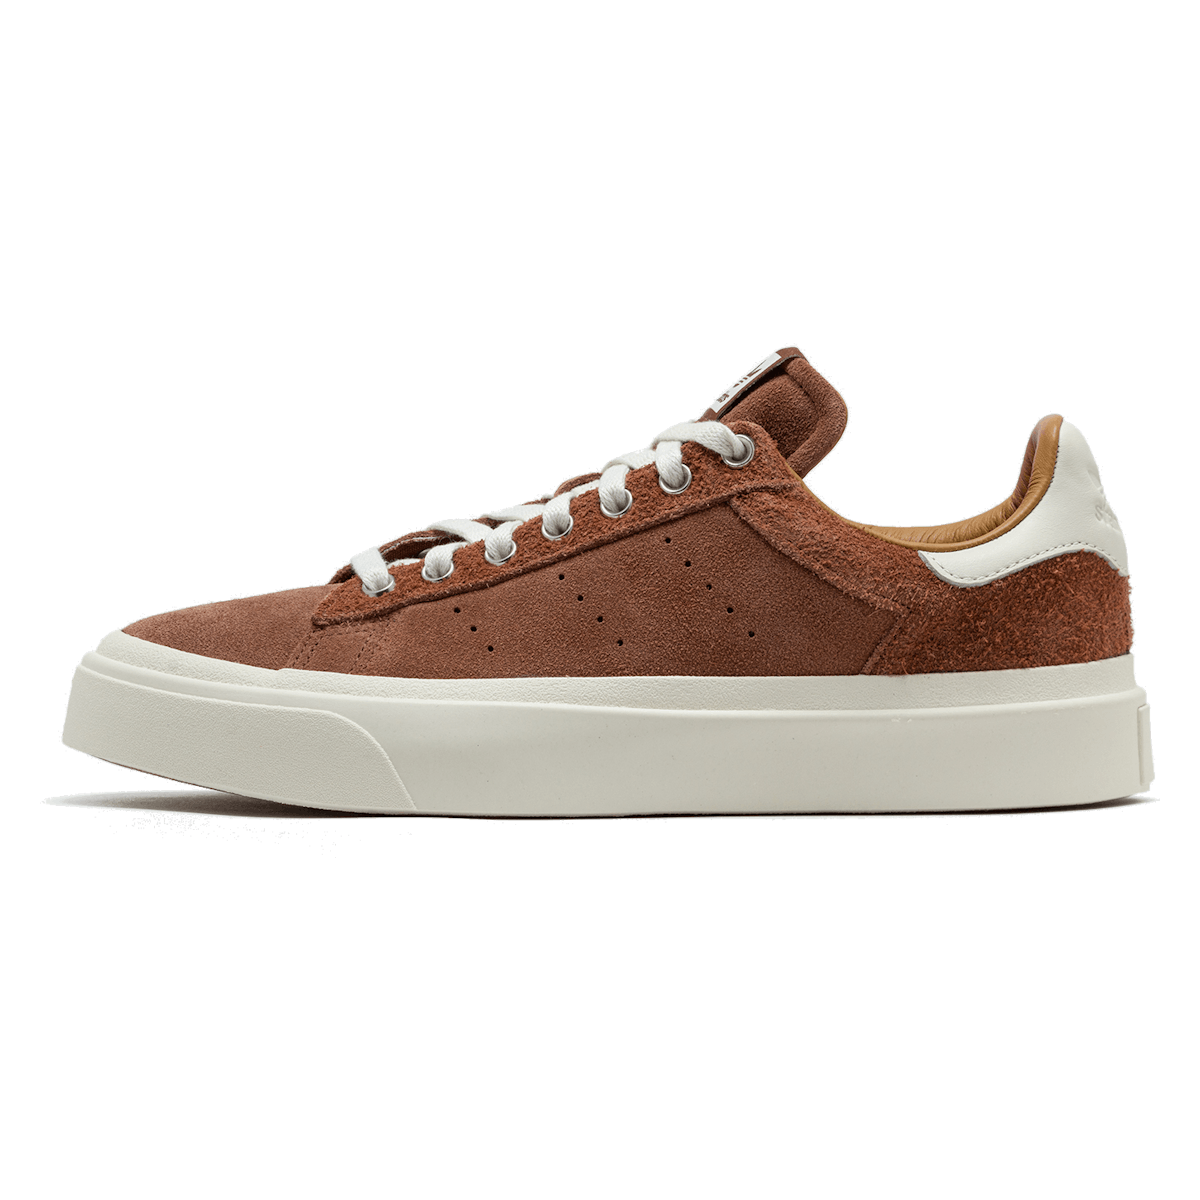 Adidas Stan Smith CS Lux "Preloved Brown"